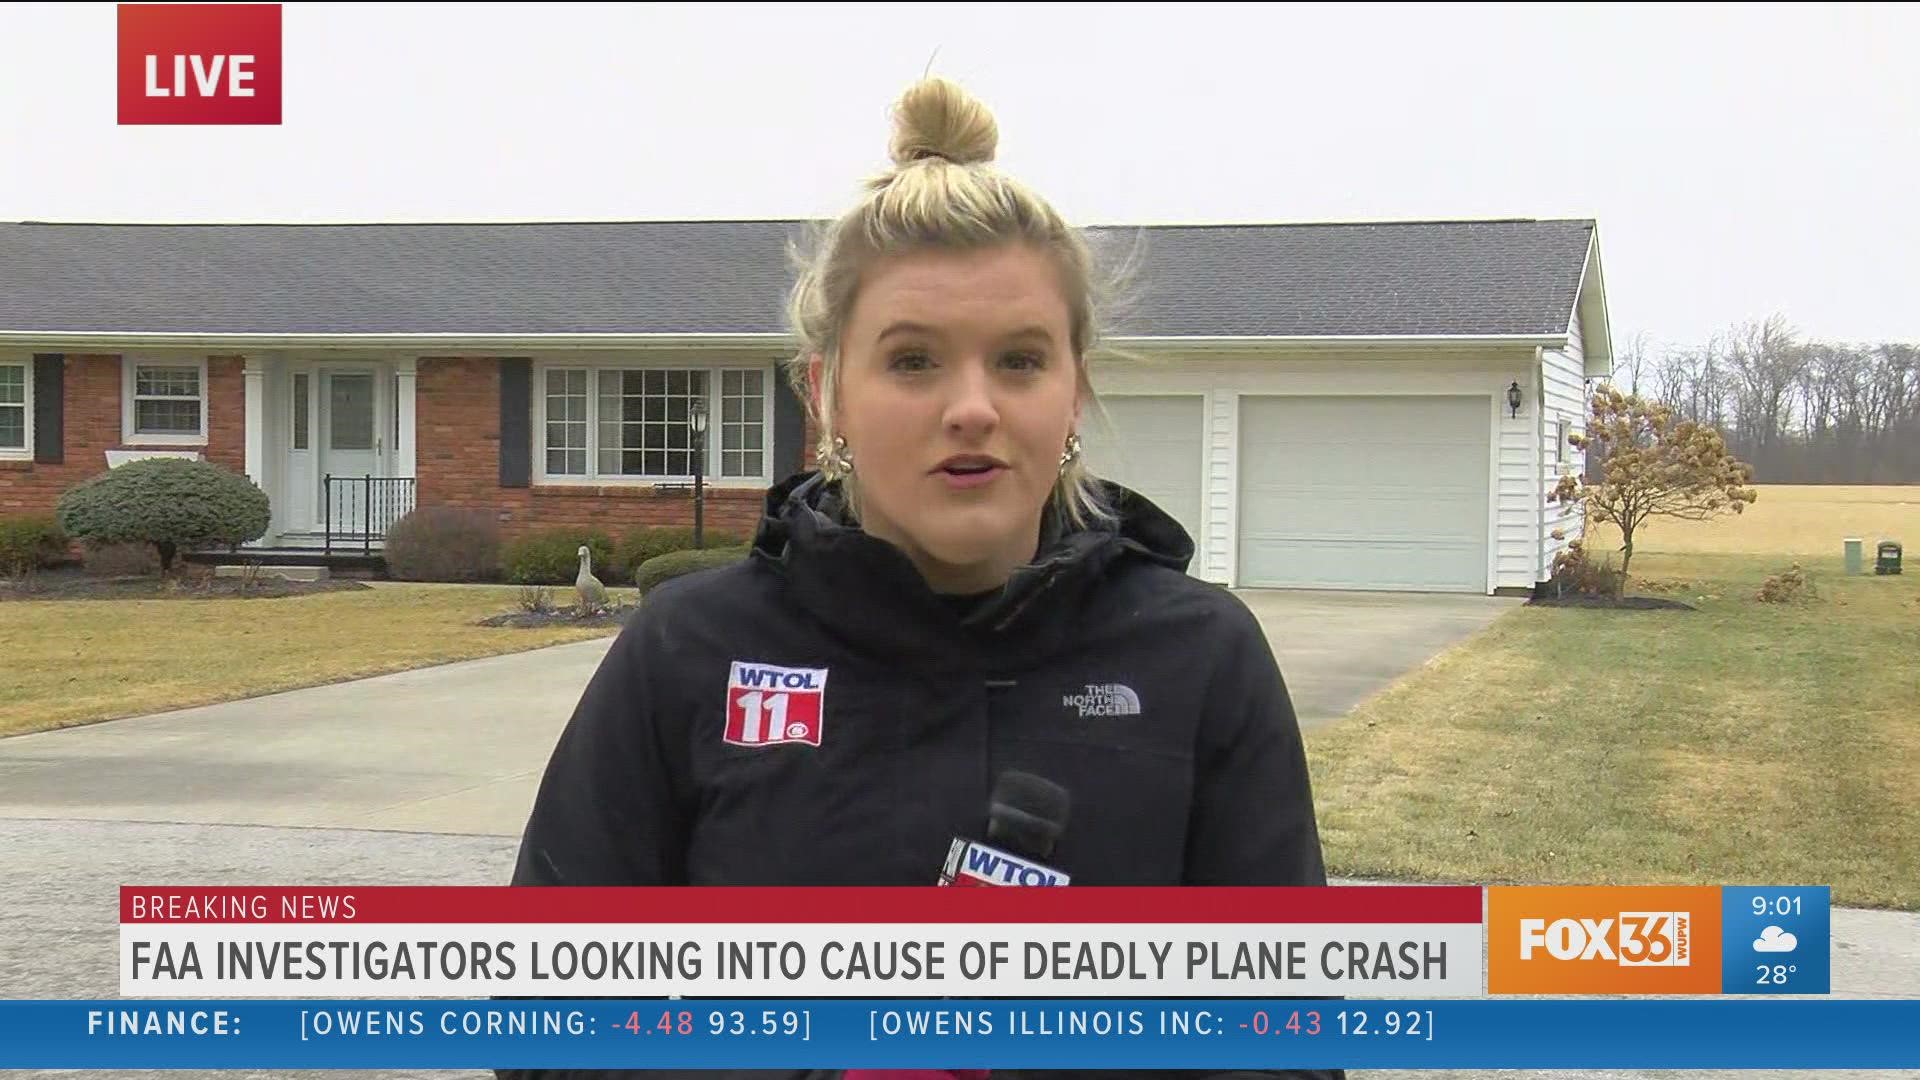 WATCH this video for the most recent information on the Fostoria plane crash. The plane was headed from Illinois to Findlay.